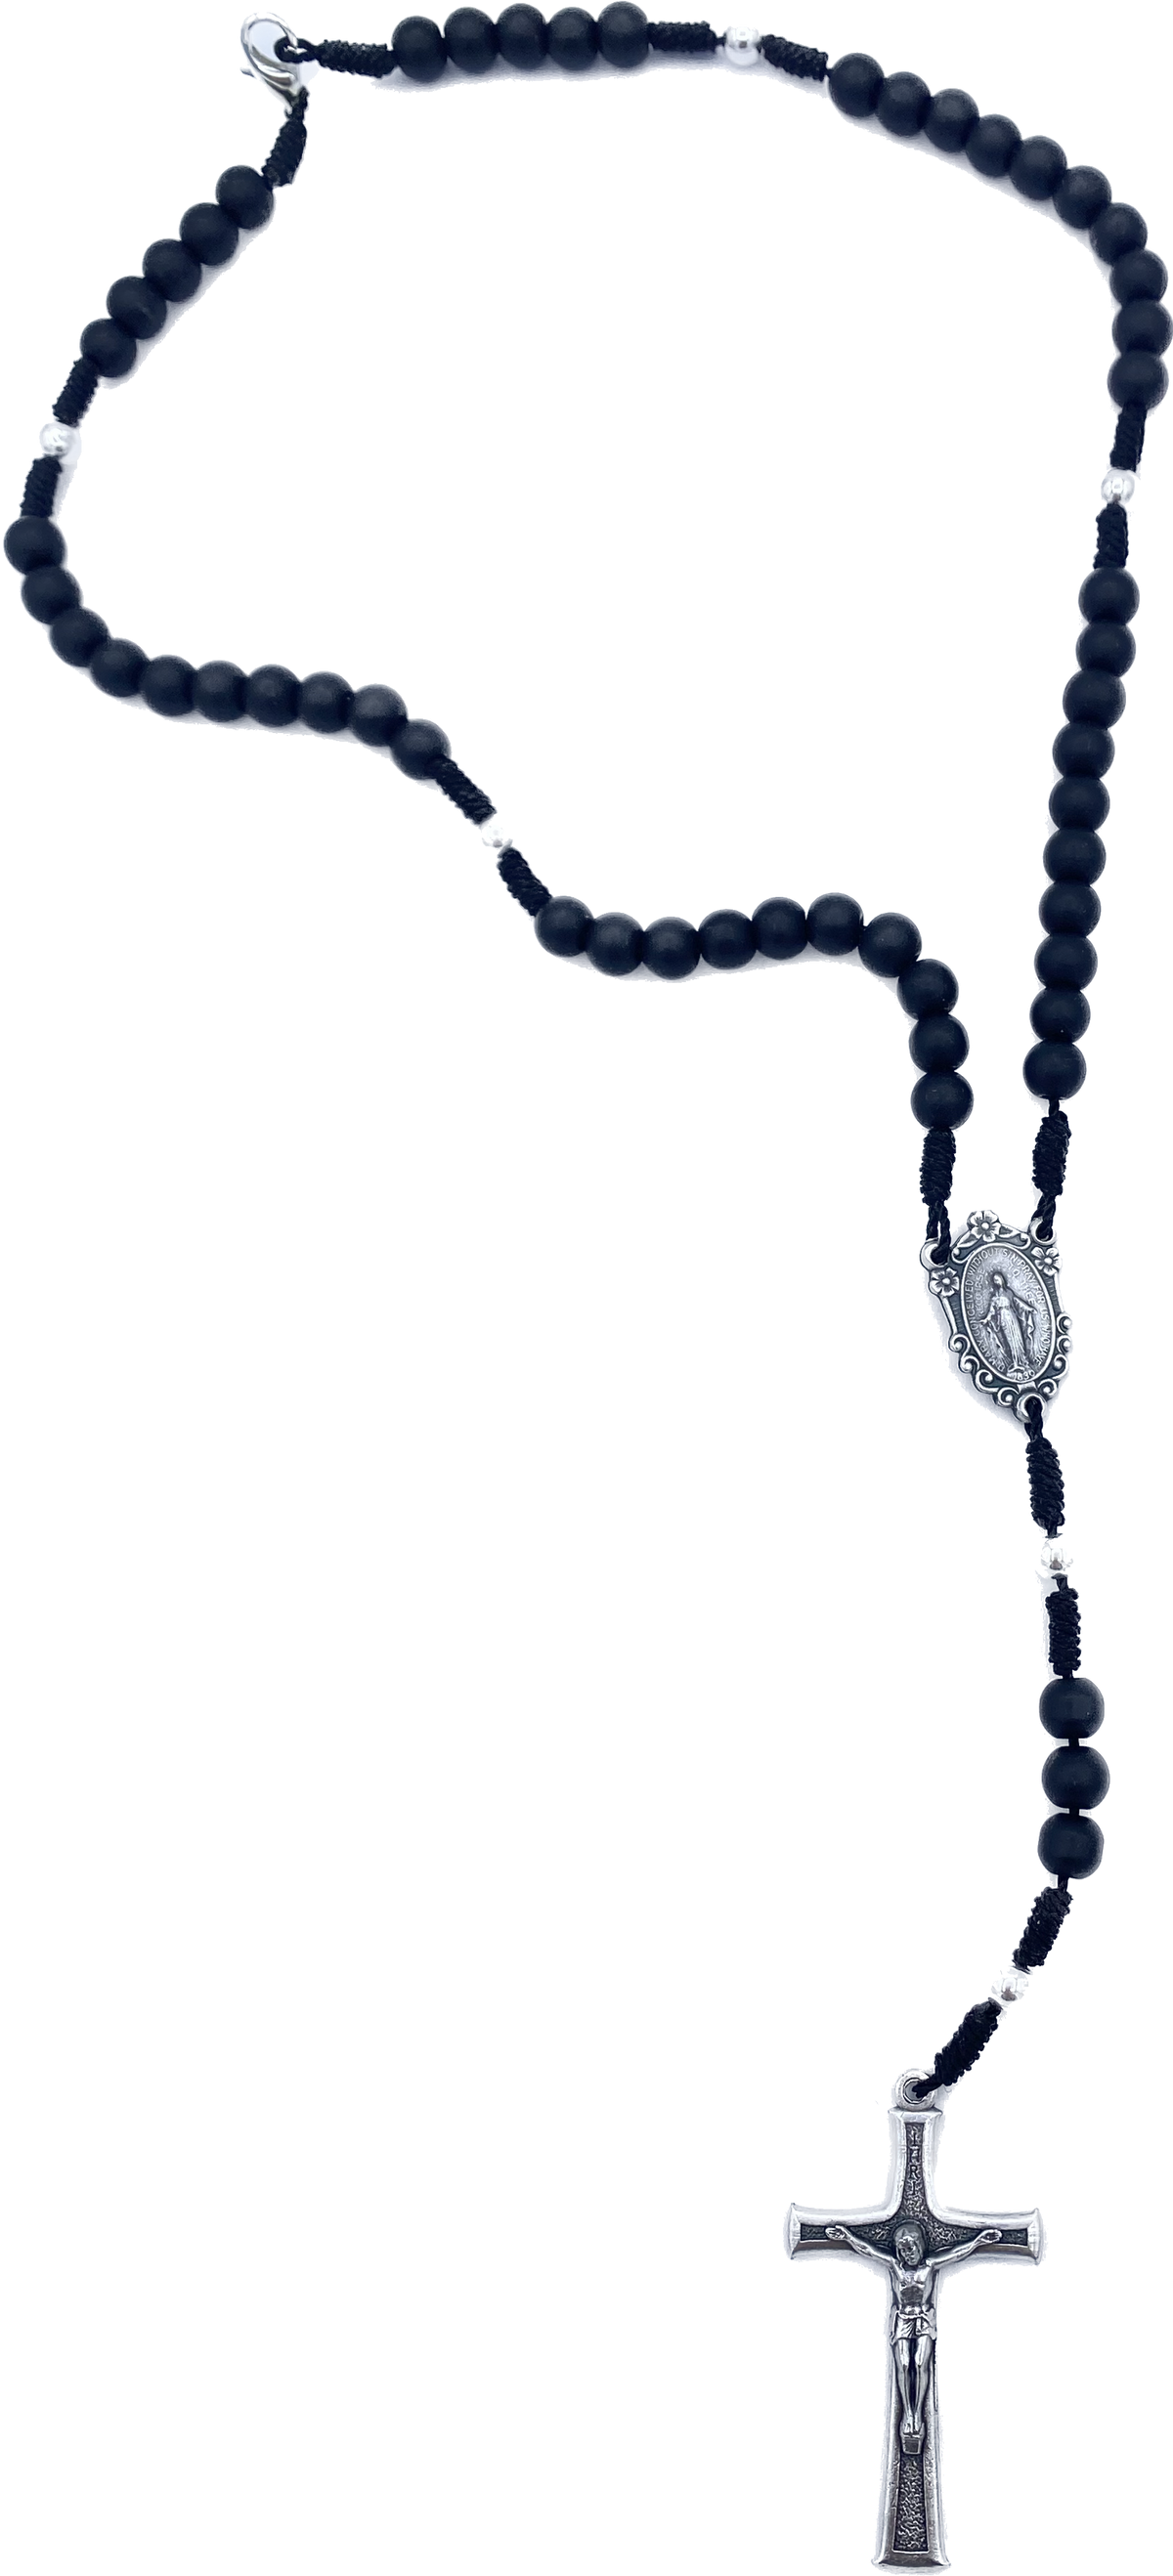 SILVER PARTER BLACK STONE ROSARY ON ROPE